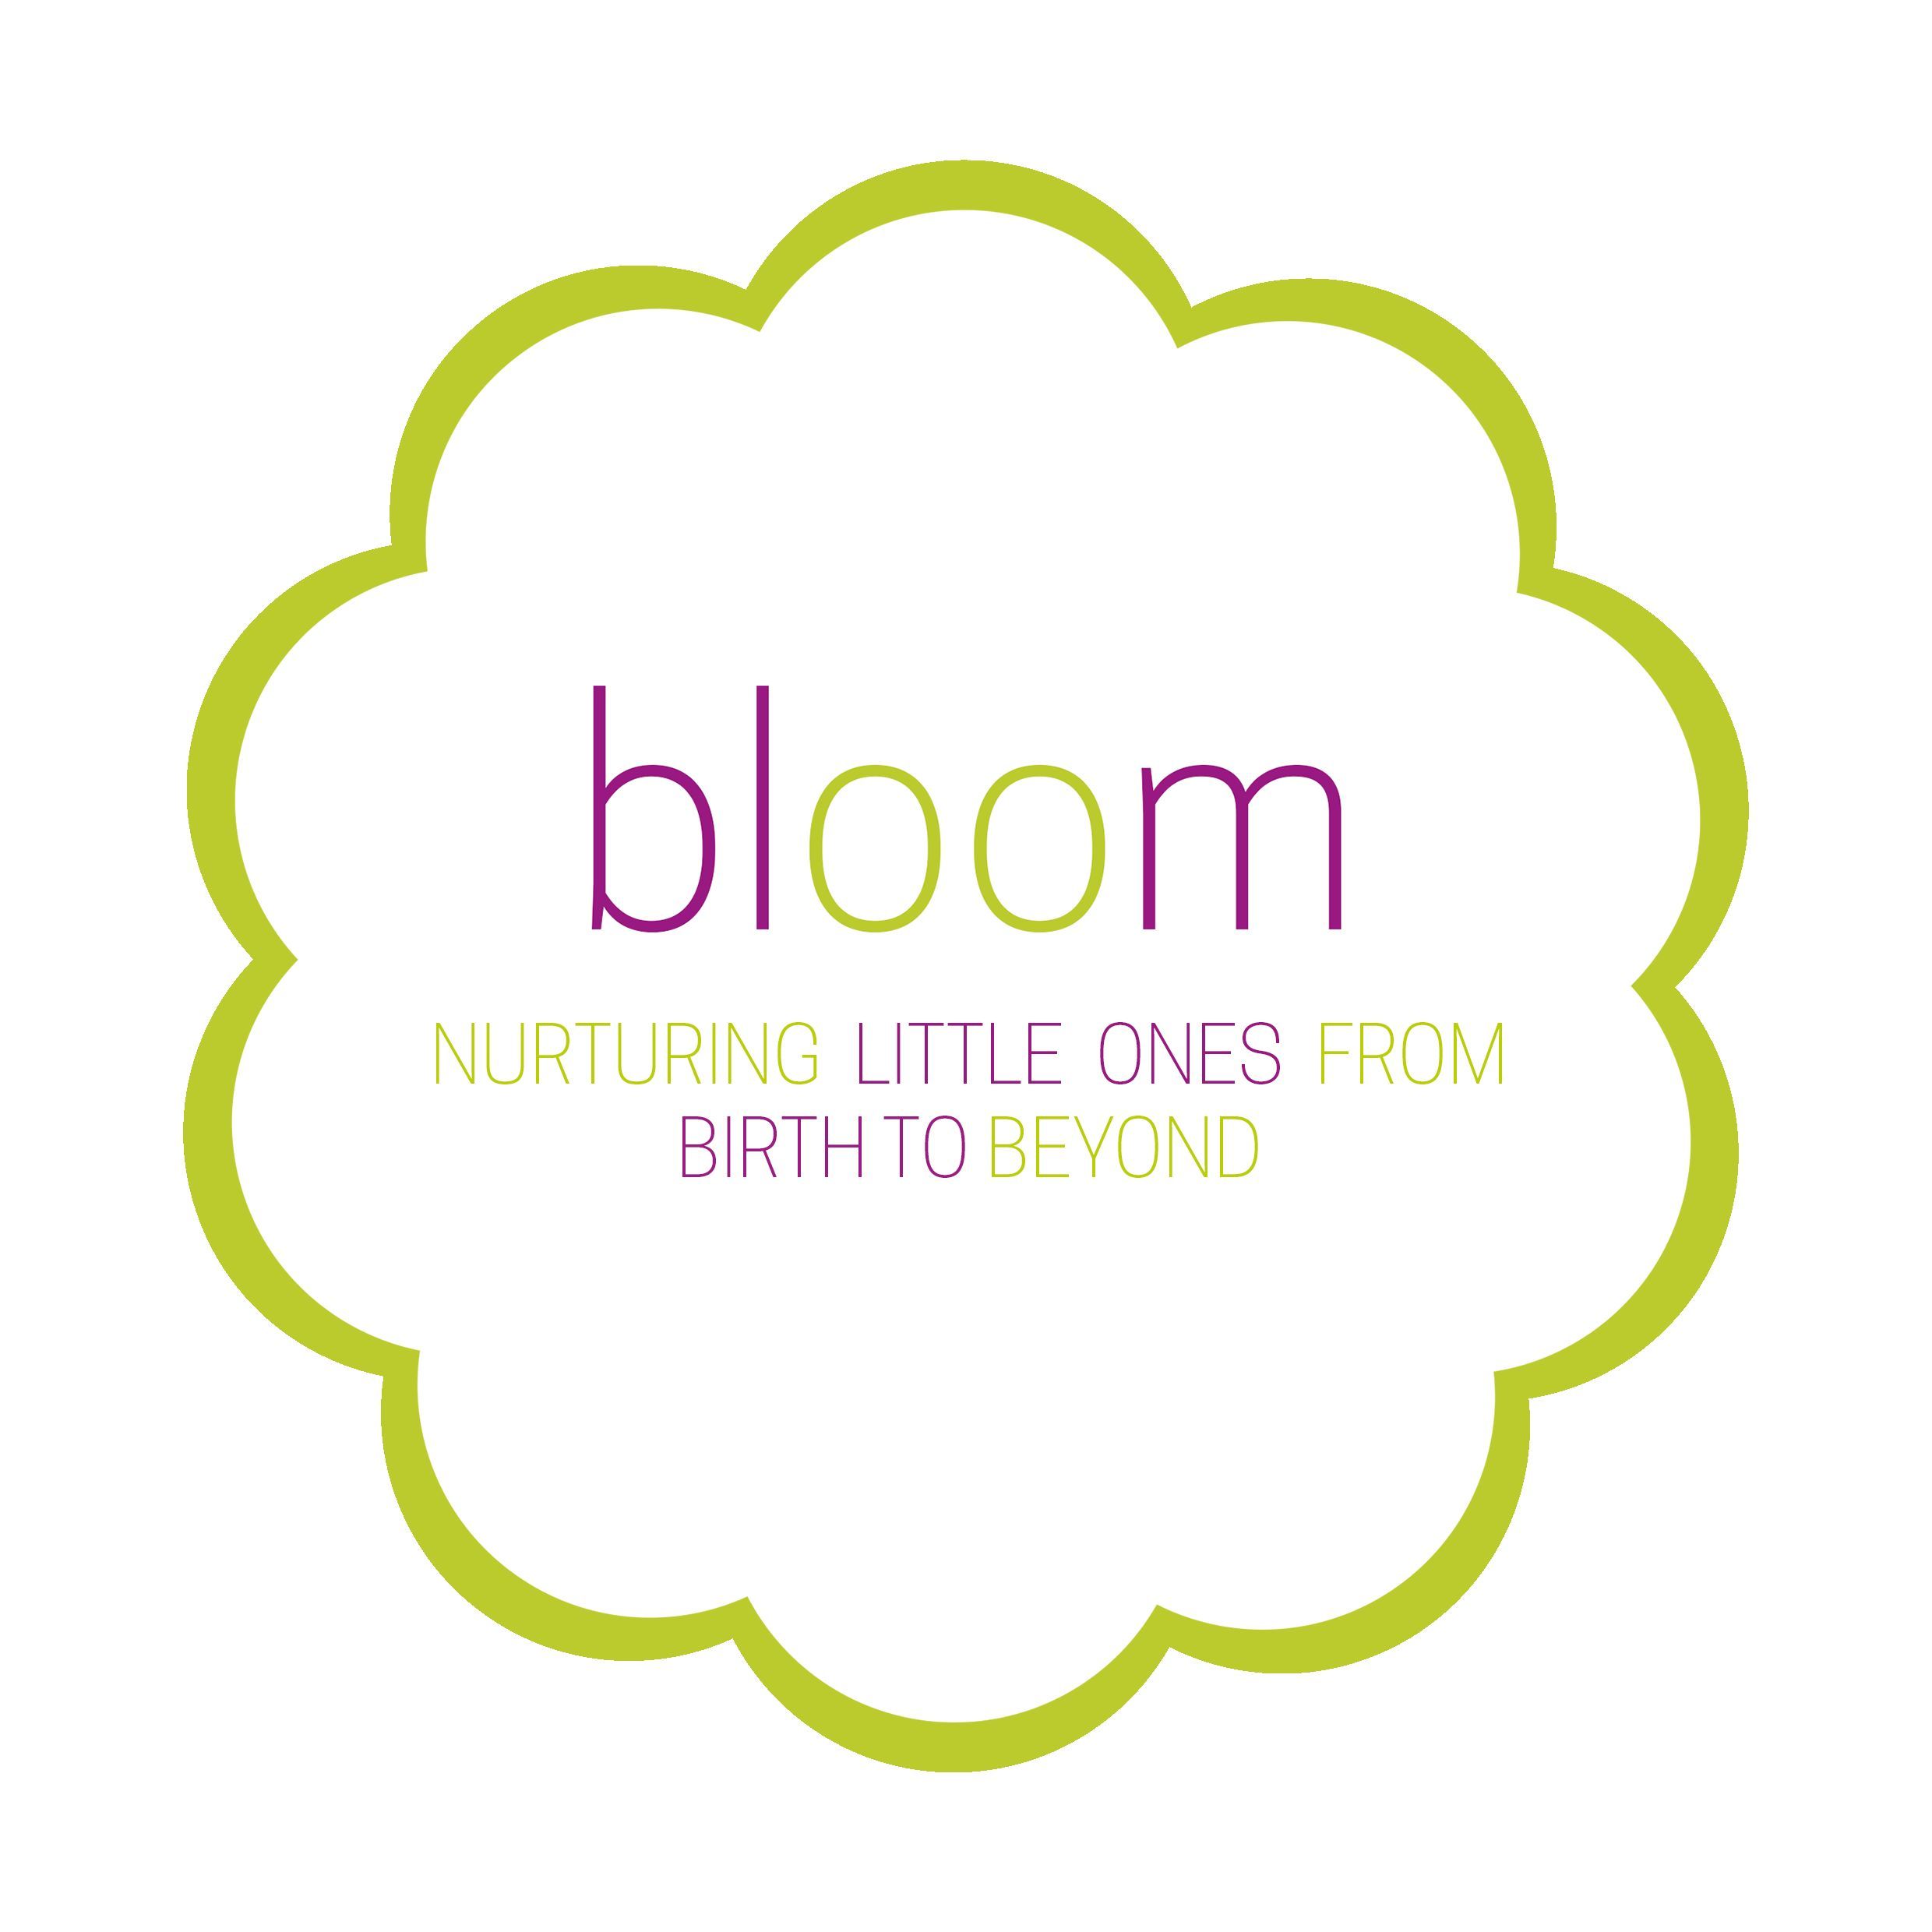 Bloom Baby Classes Reading North's logo